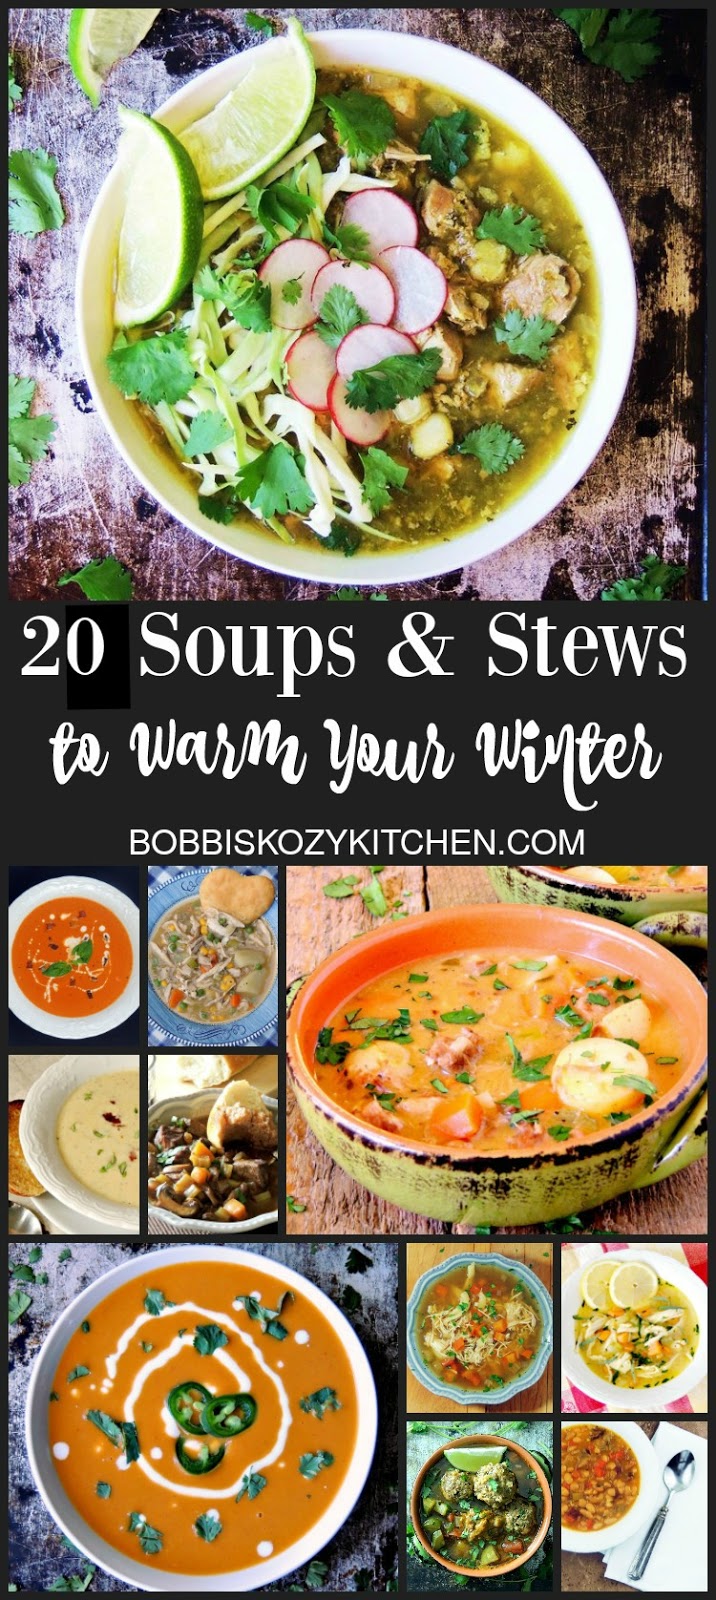 20 Soups and Stews to Warm Your Winter from www.bobbiskozykitchen.com